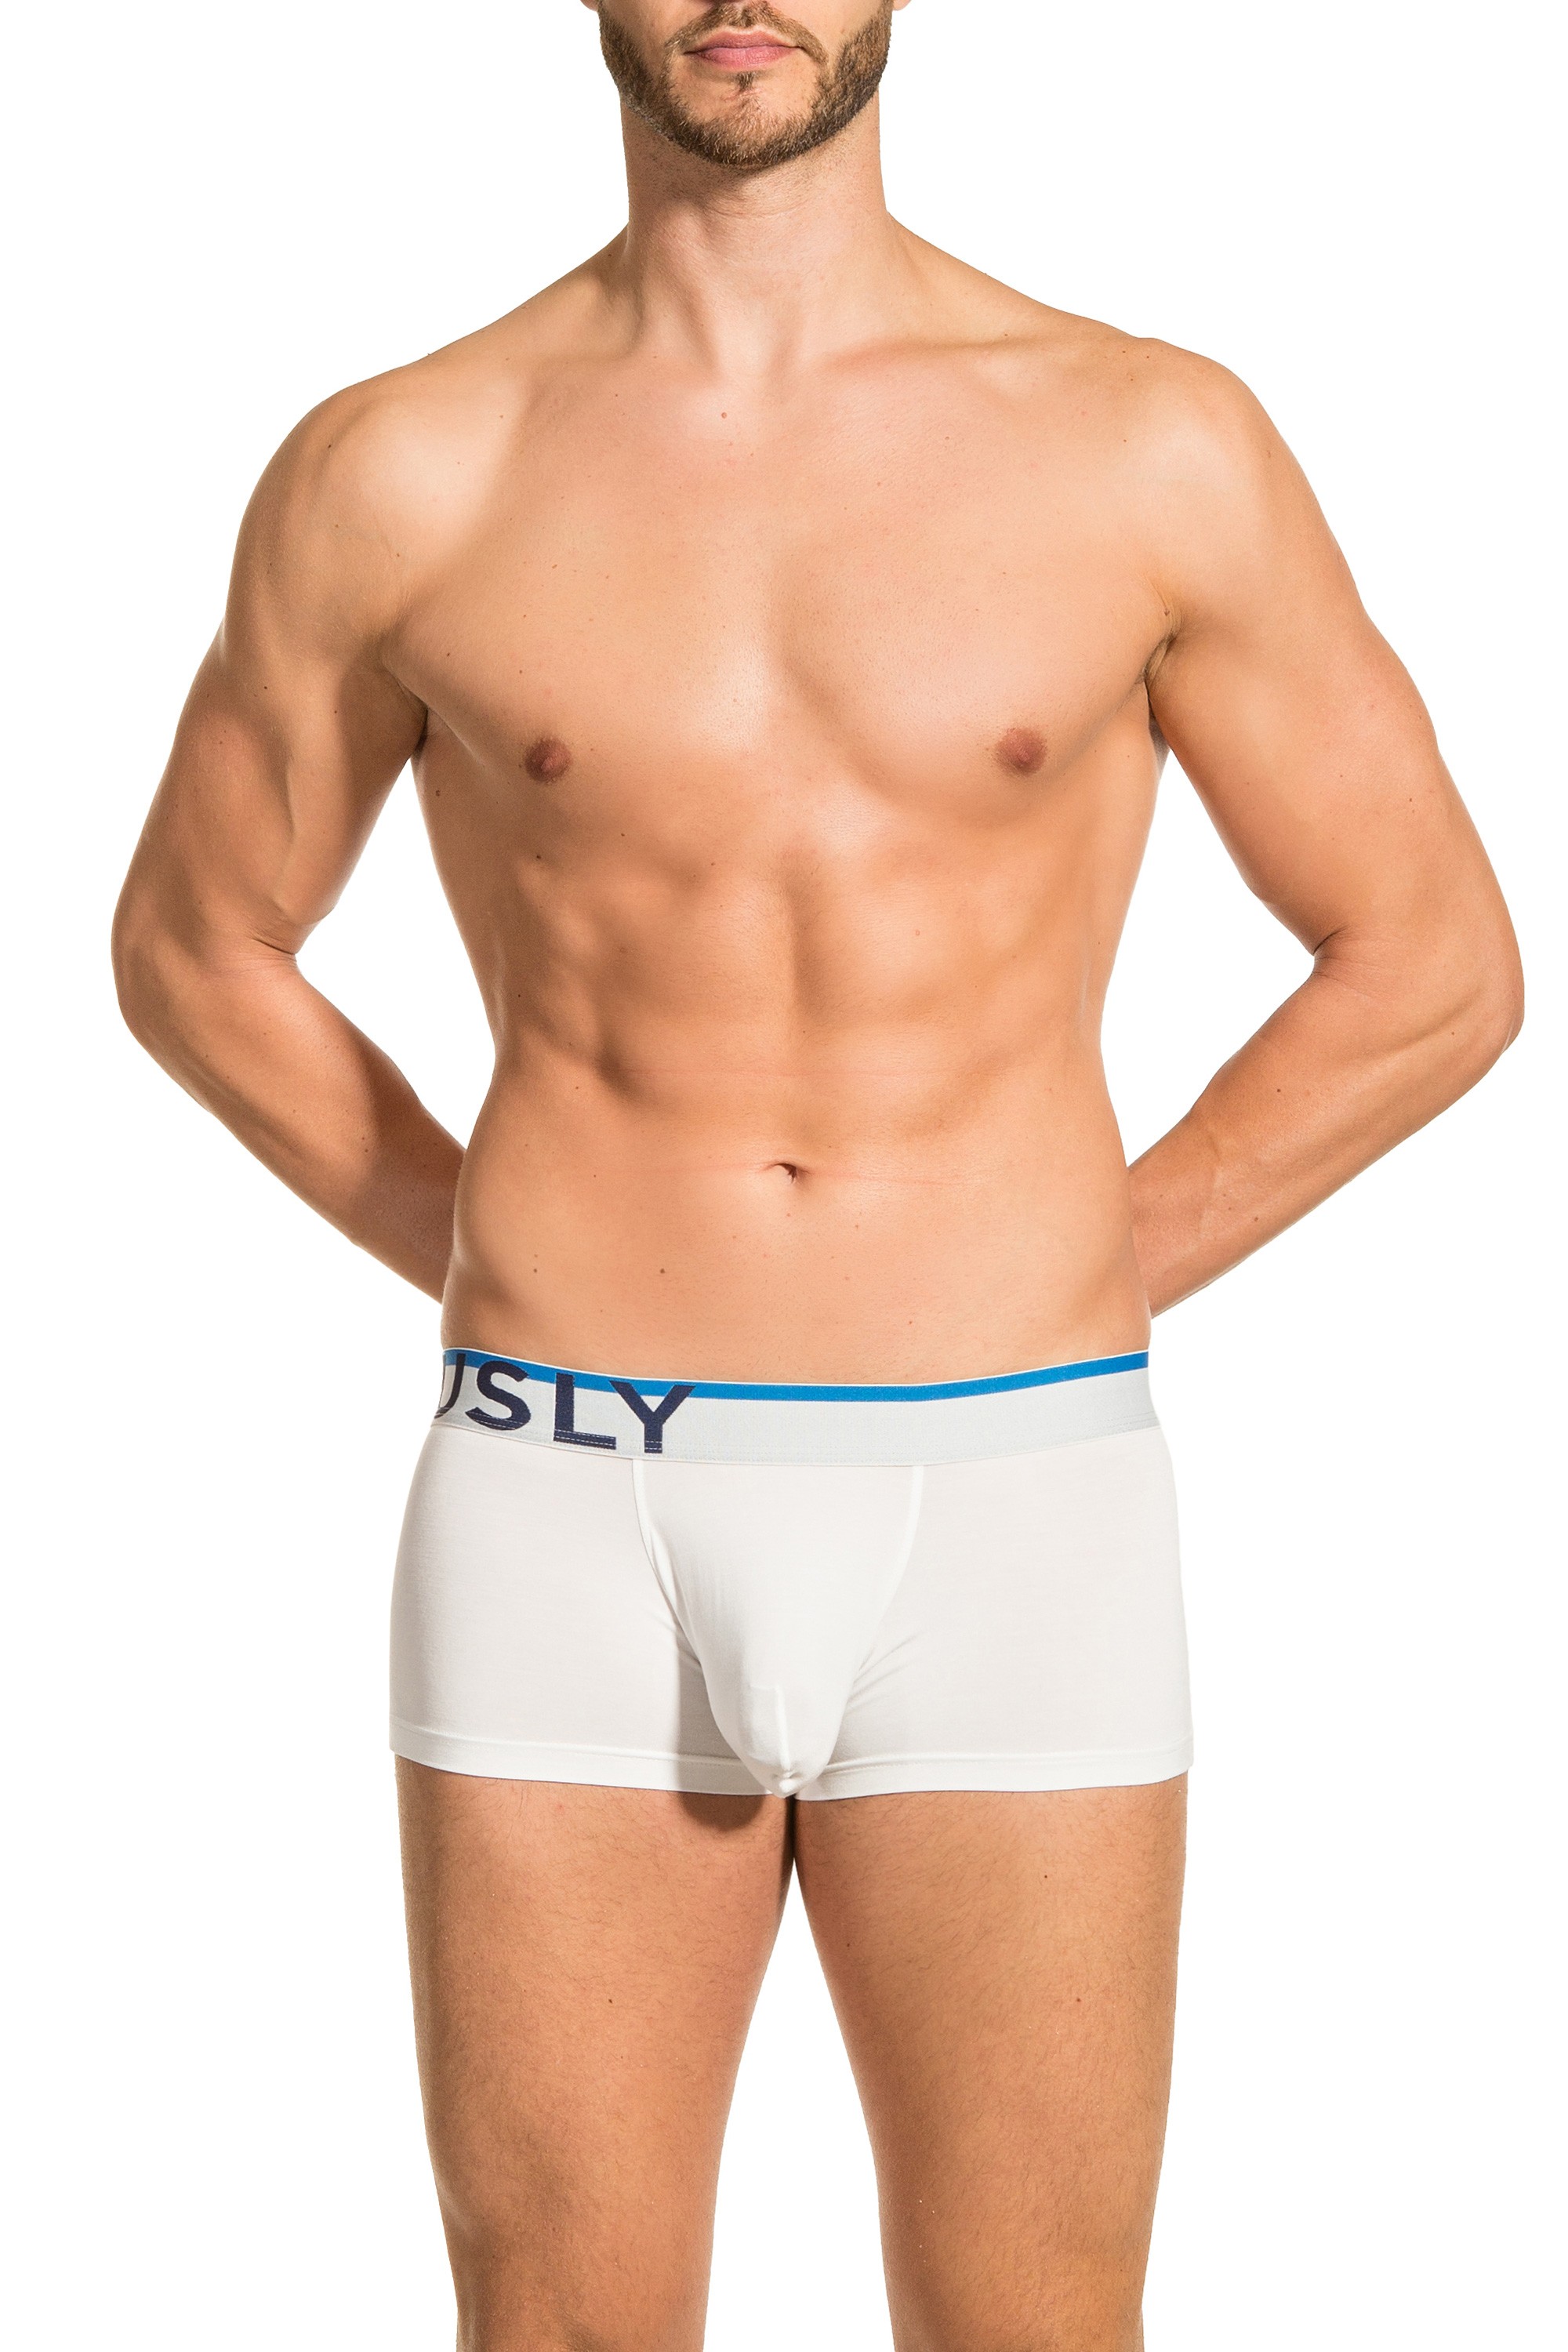 Men and Underwear on X: The EveryMan Trunks in black by Obviously